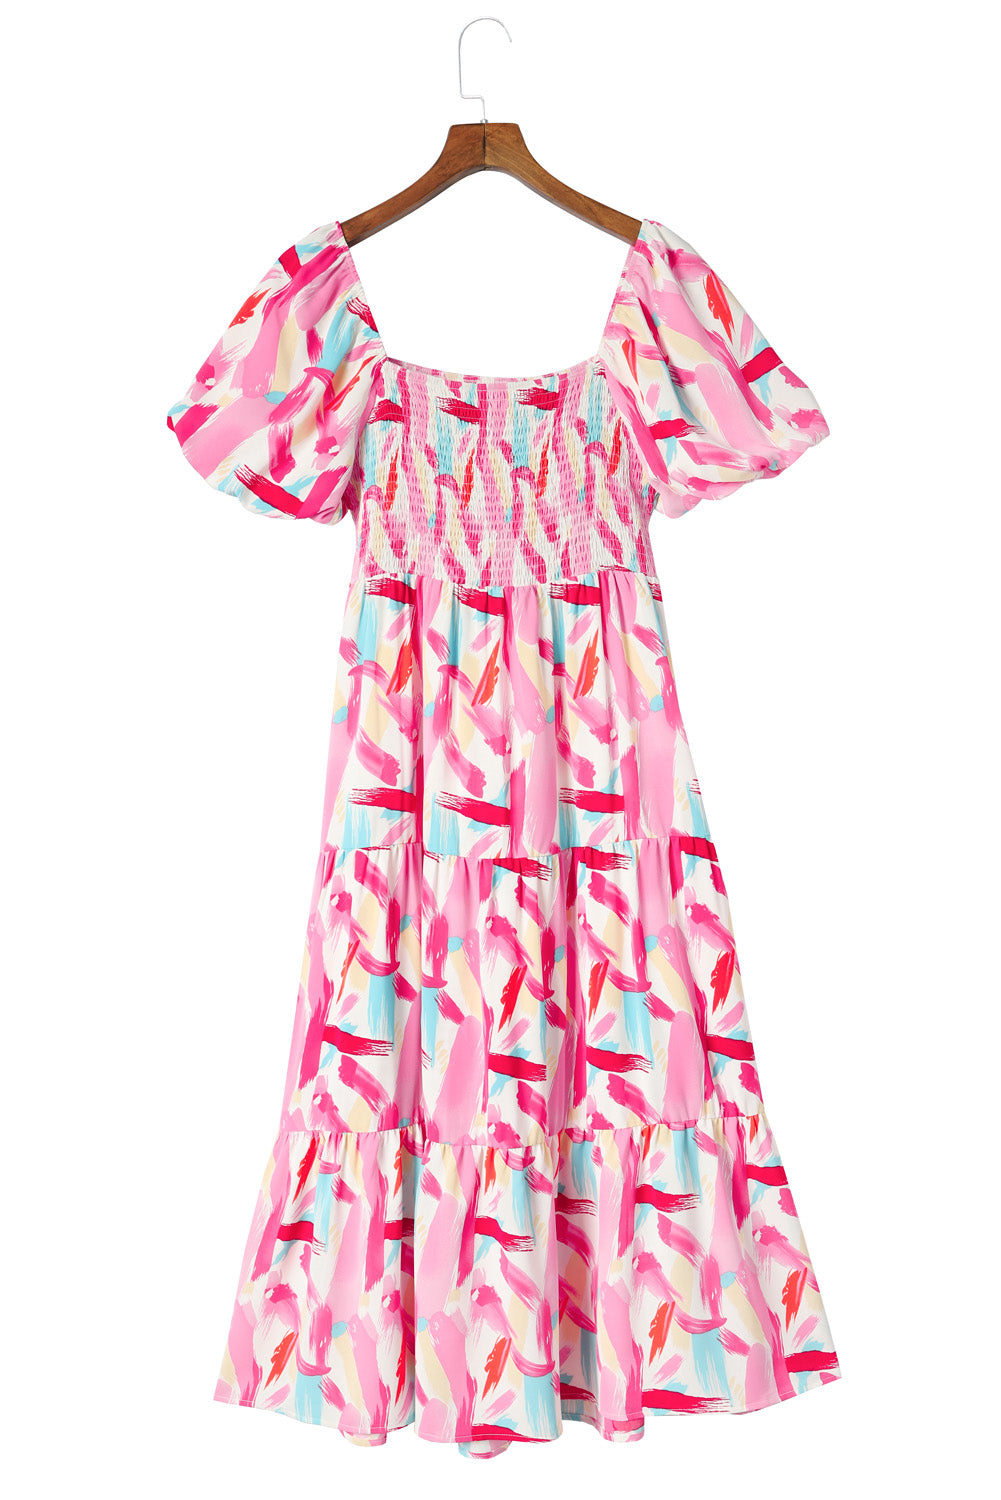 Women’s Printed Square Neck Tied Smocked Dress